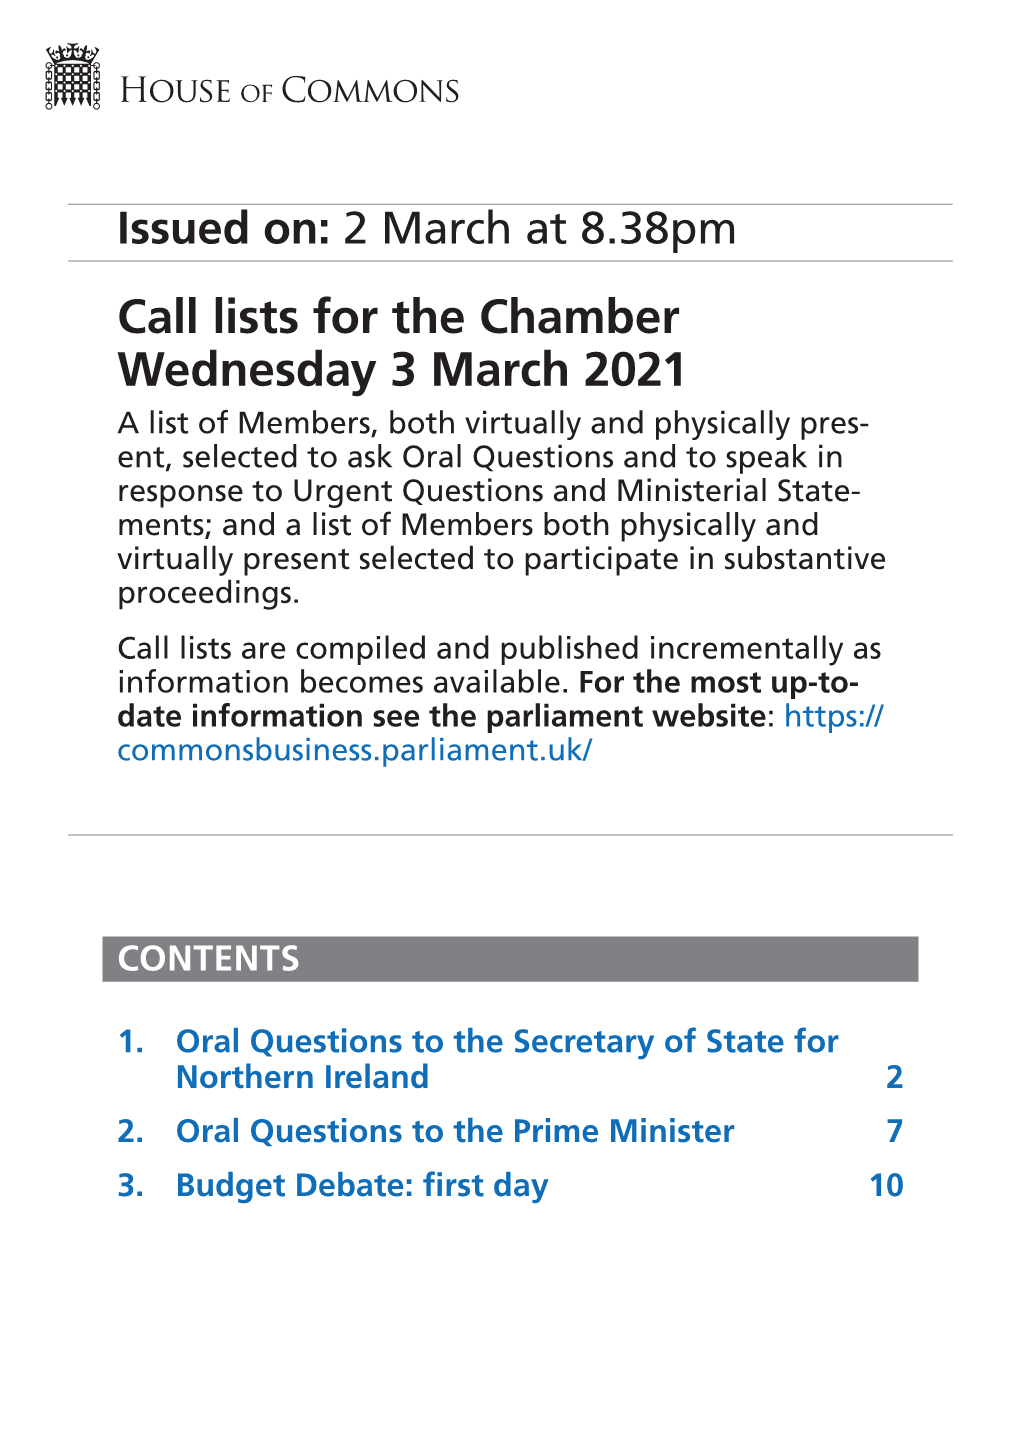 Call Lists for the Chamber Wednesday 3 March 2021